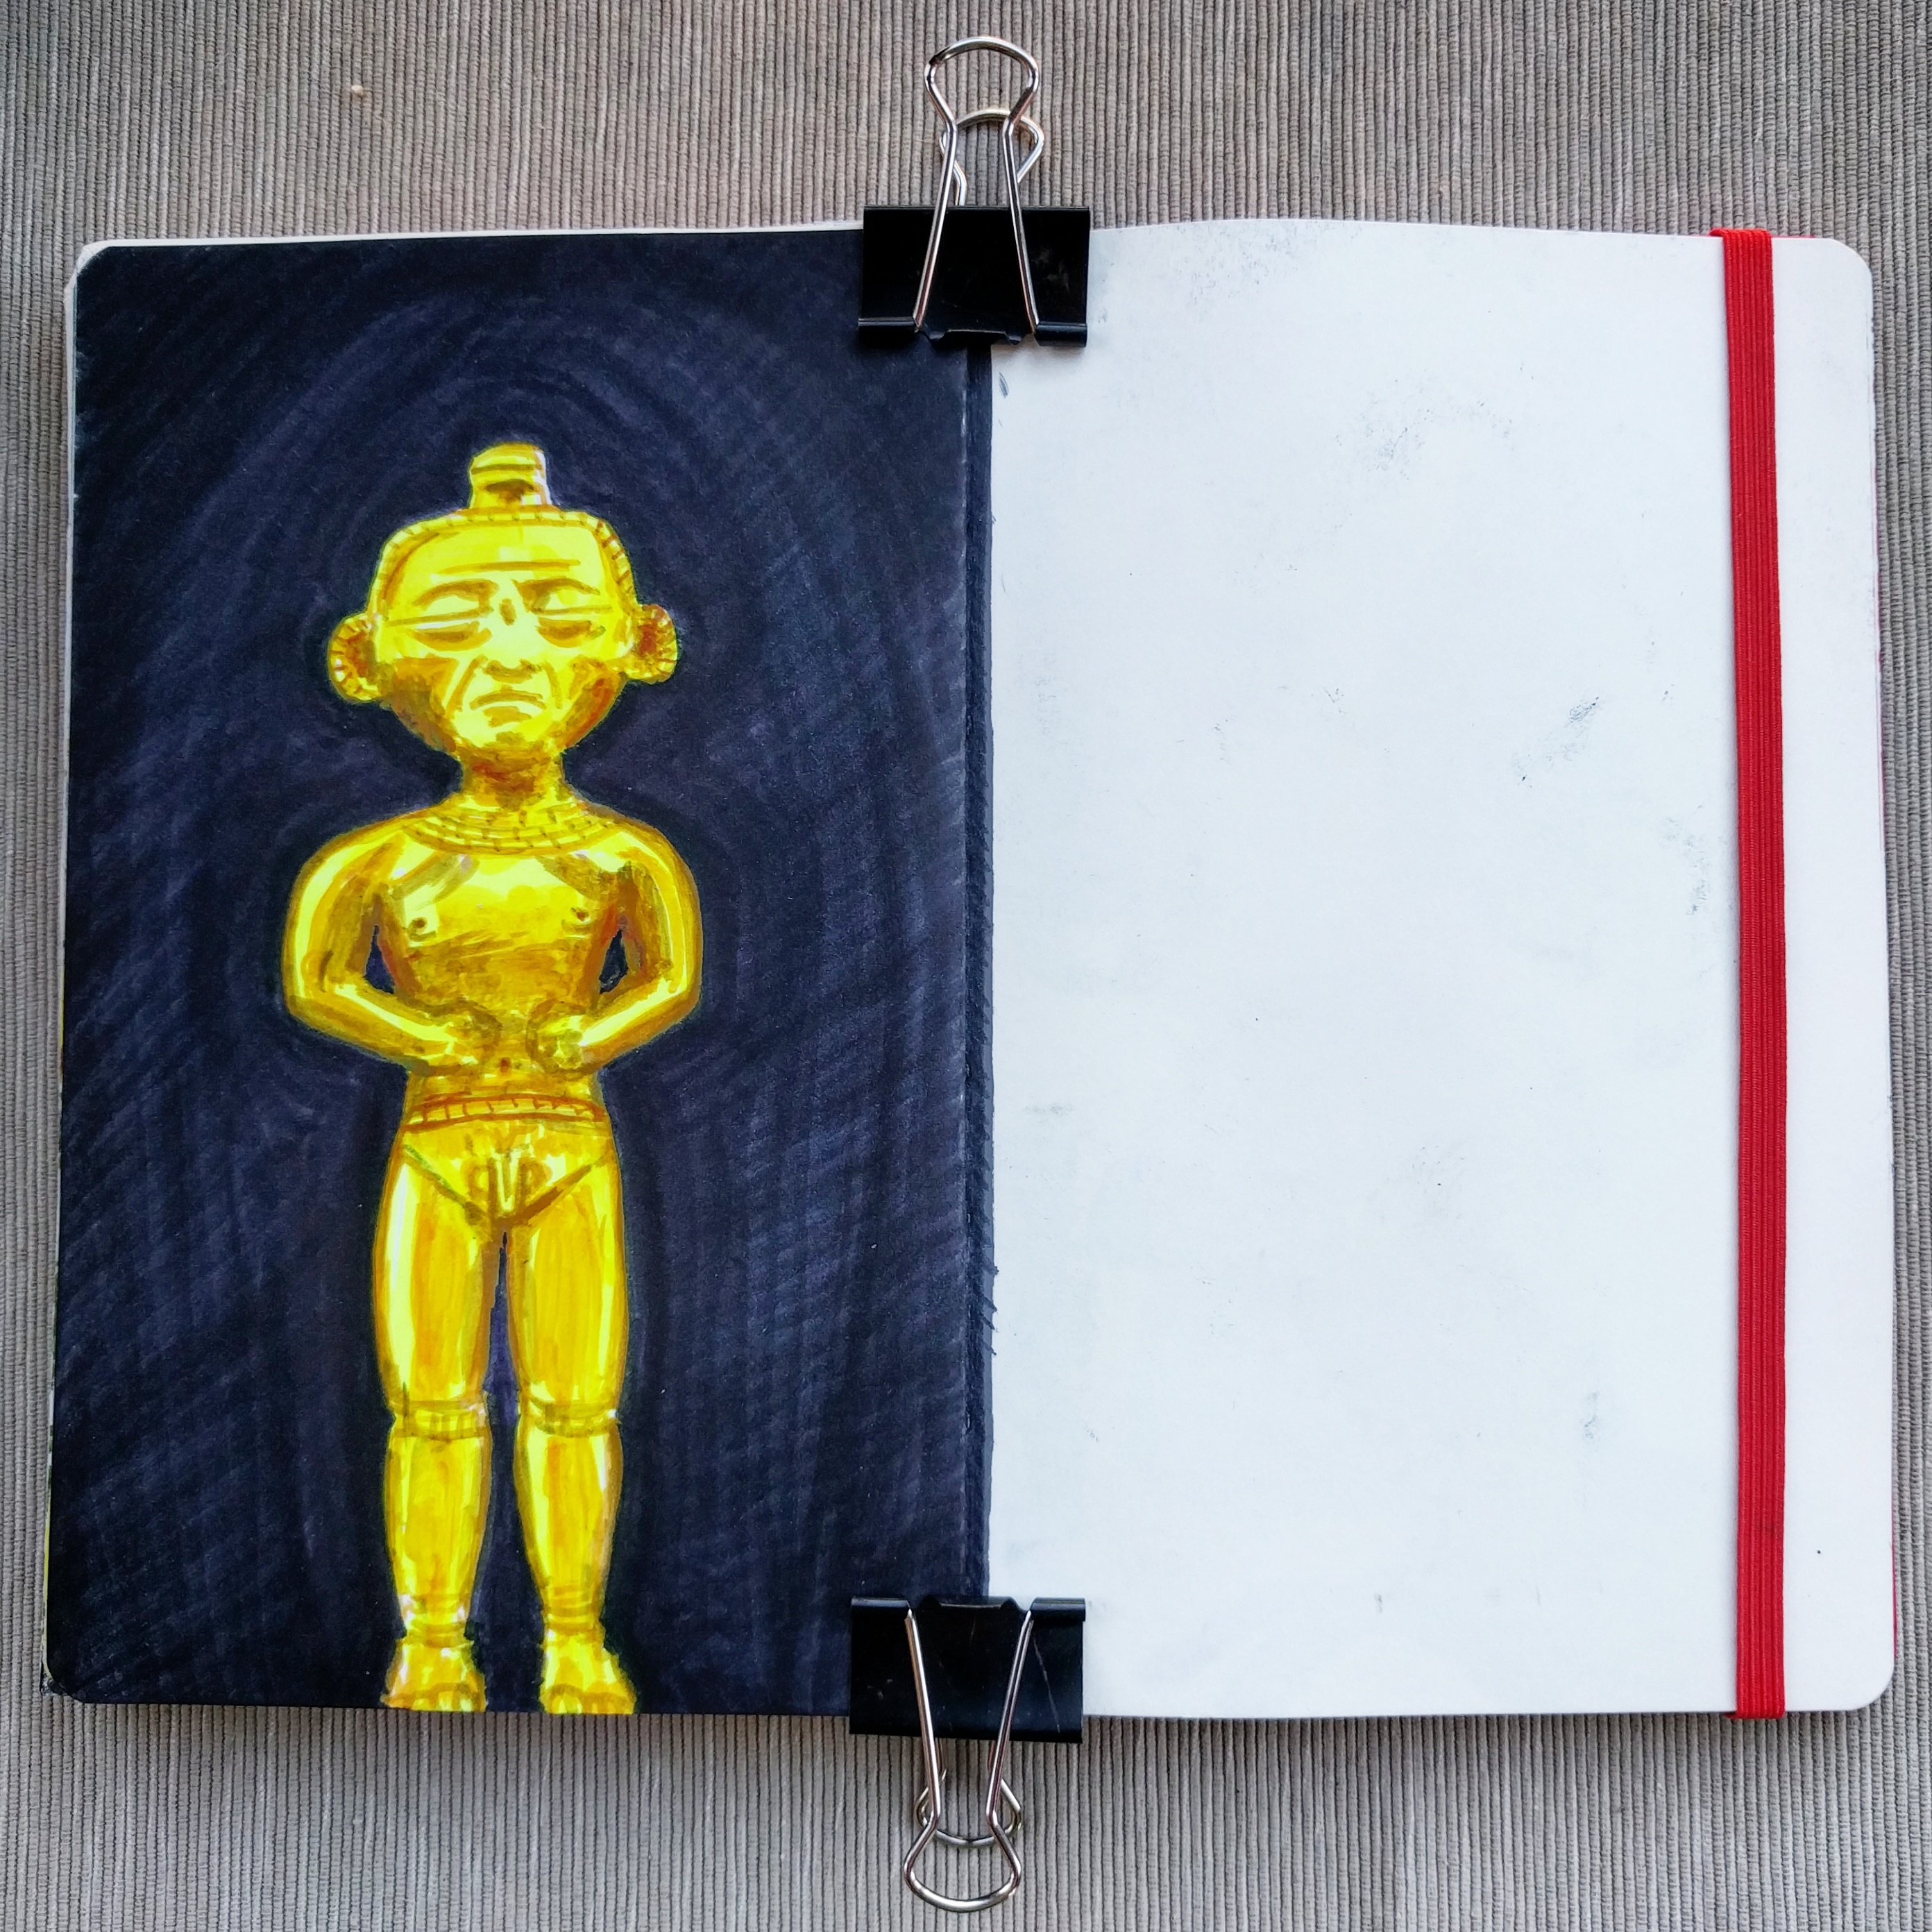 Golden statue with markers